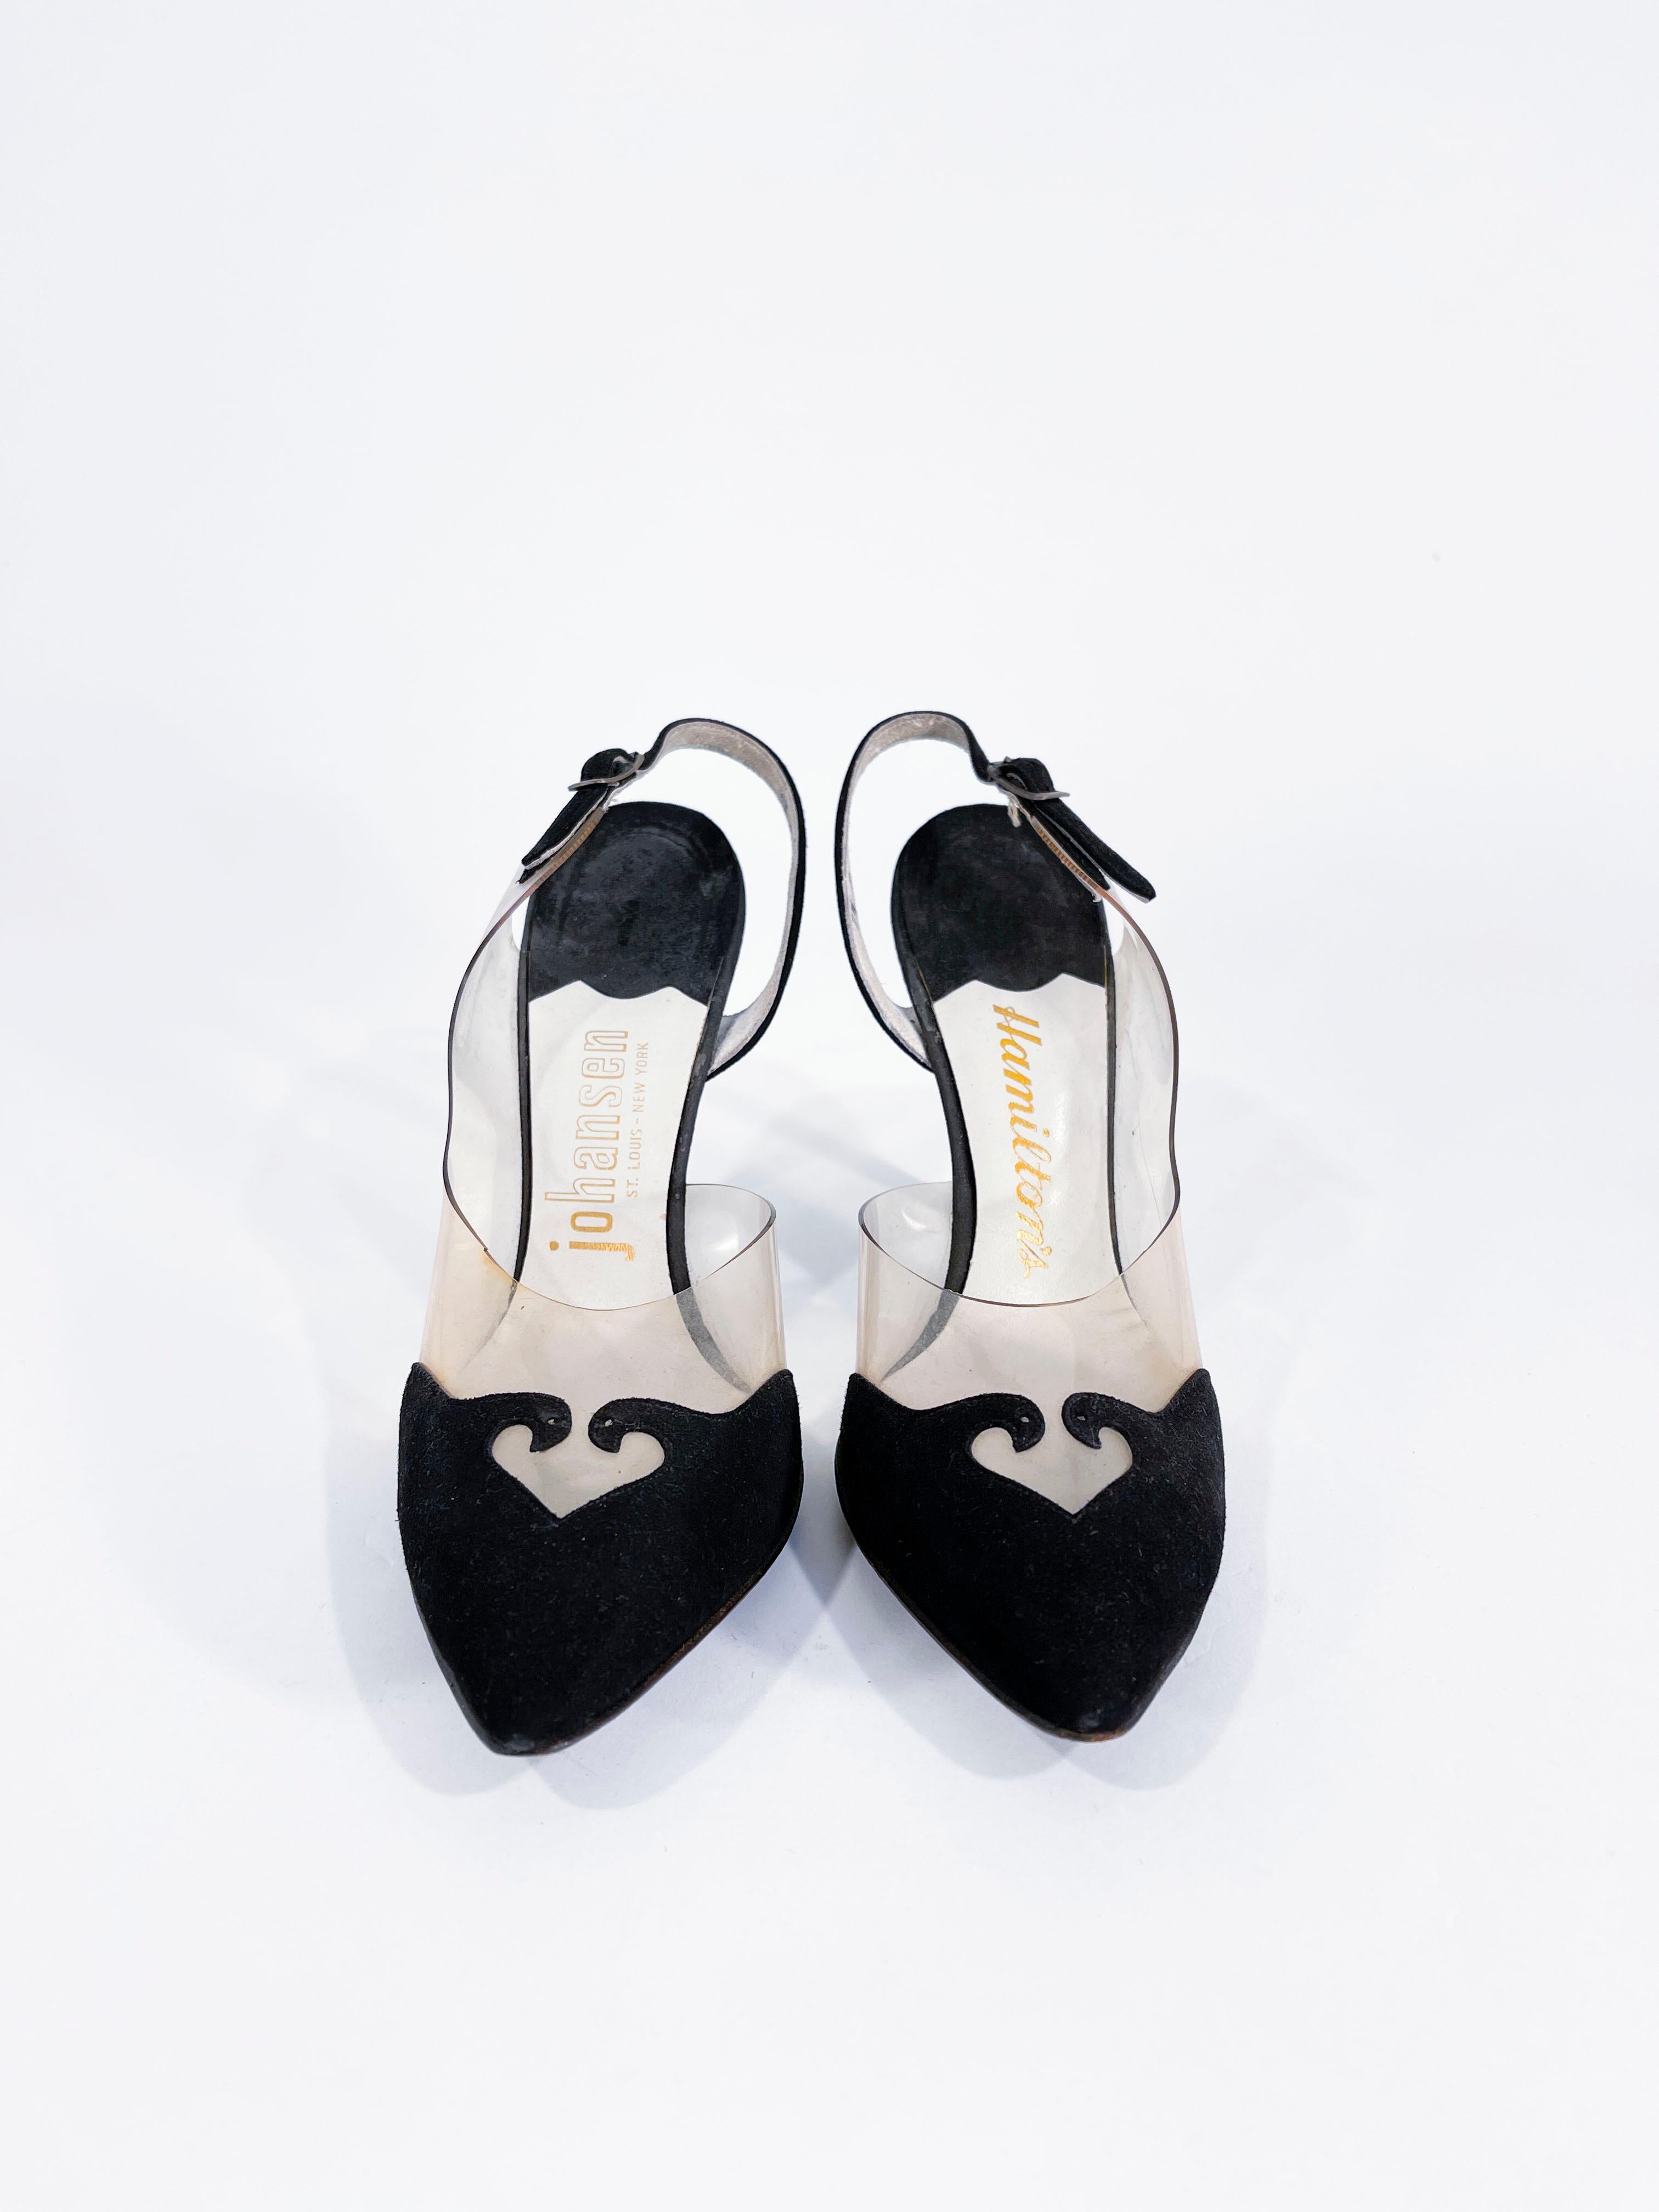 1960s black suede and clear vinyl stiletto heels featuring a decorative contrasting pattern, slightly back open heel and a pointed toe. The heel is 3.5 inches tall.